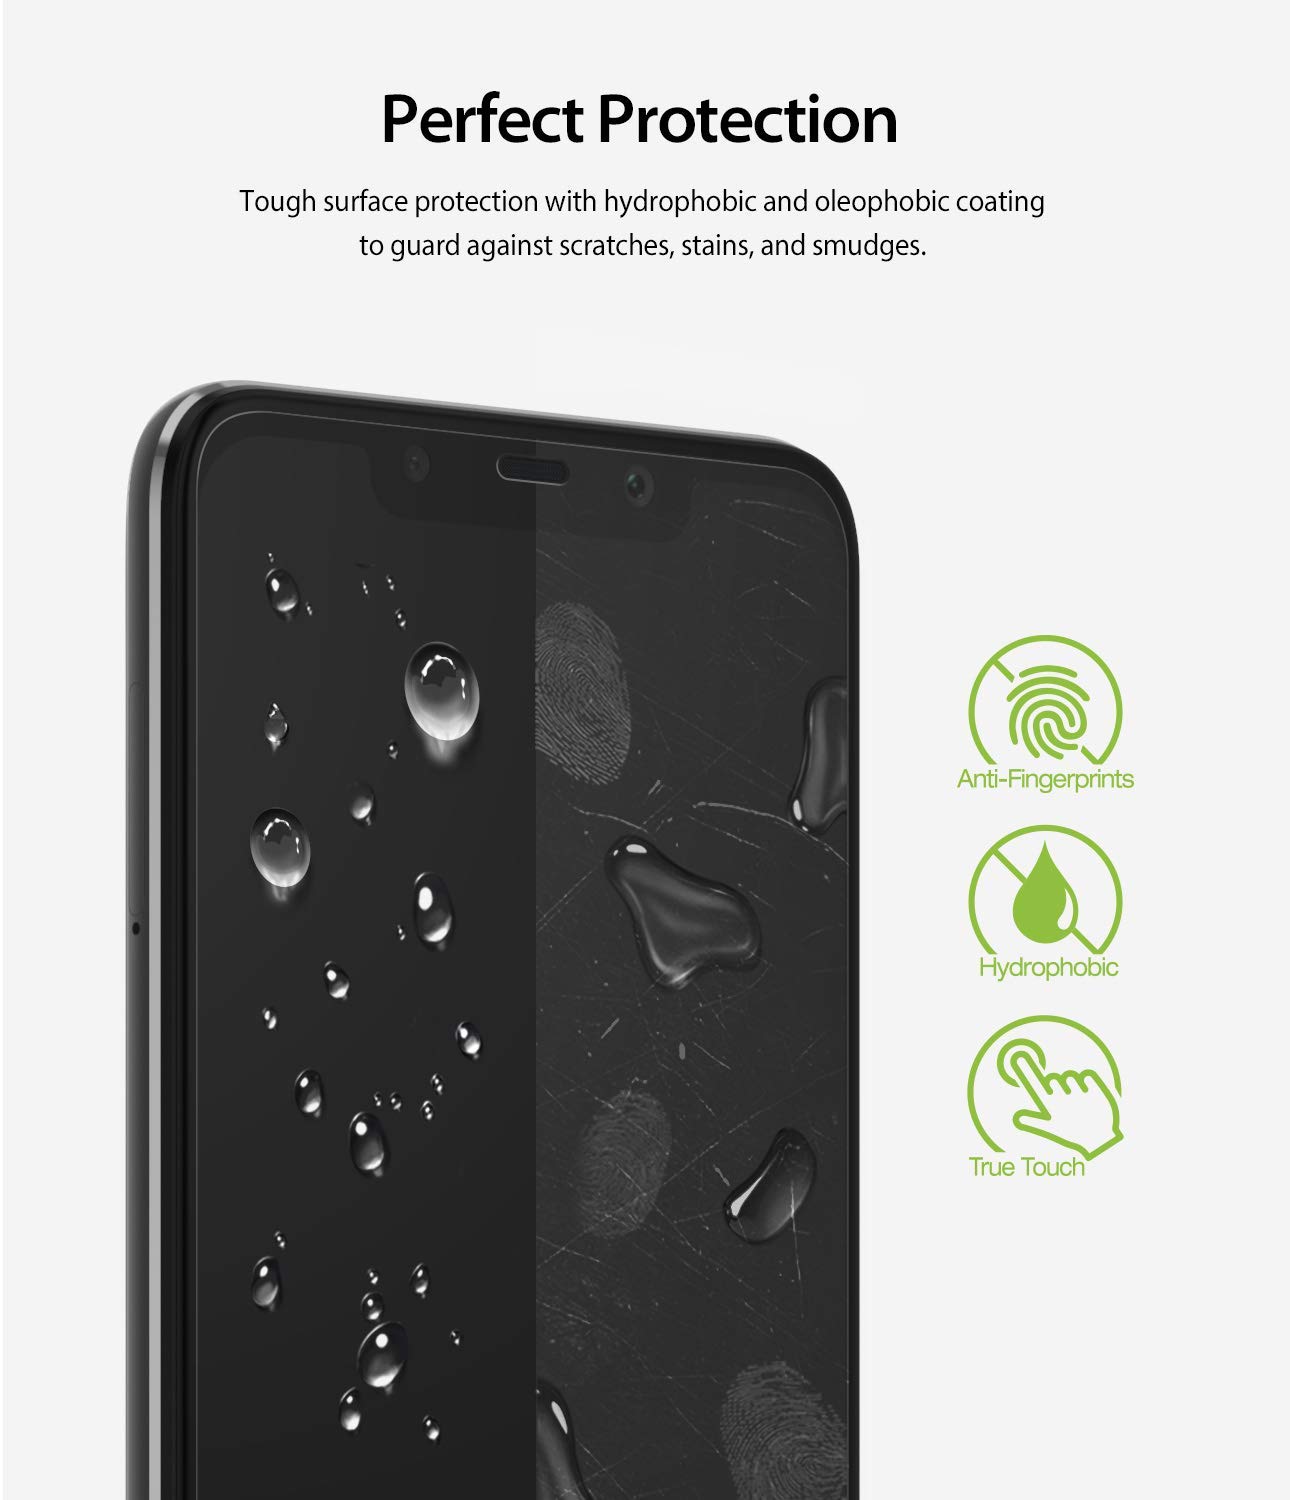 tough surface protection with hydro and oleophobic coating